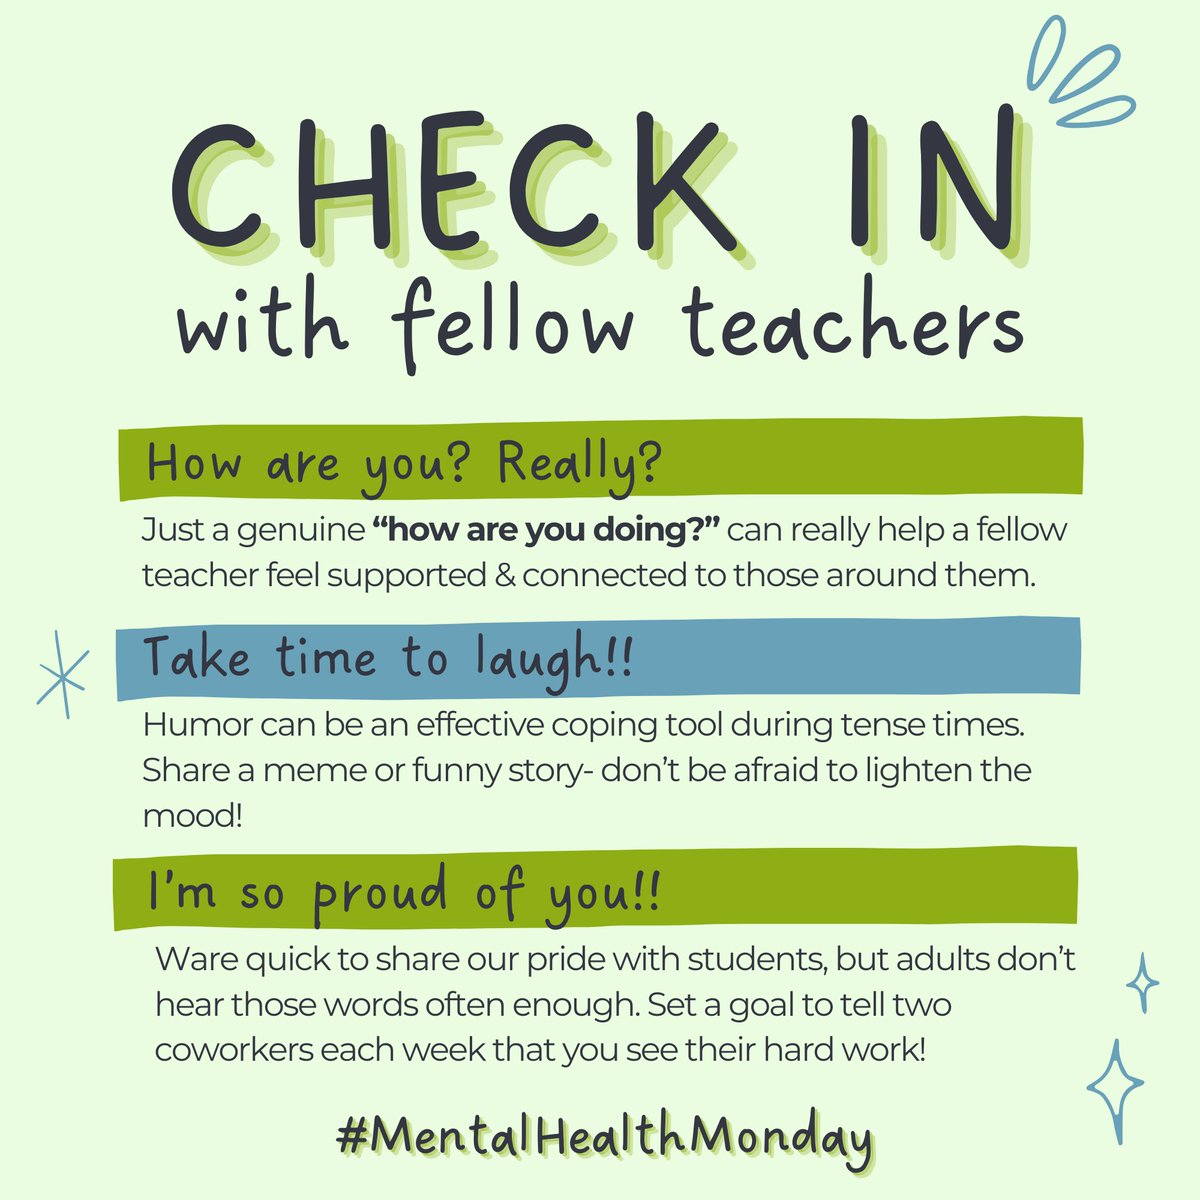 It's #MentalHealthMonday! 💚 Take a moment to check in with your fellow educators and spread some positivity with your team! #ConnectGrowServe